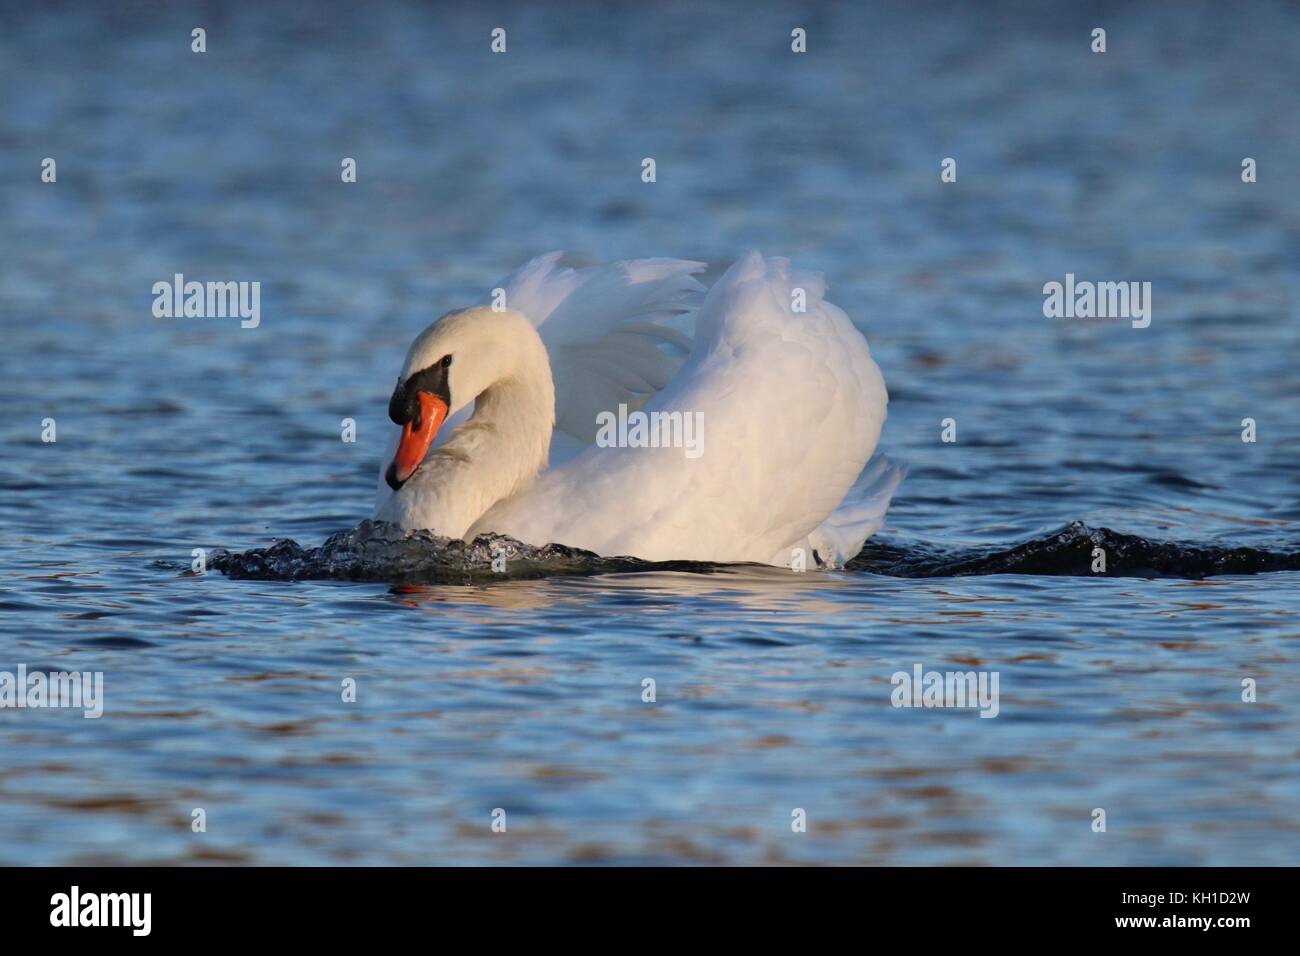 A majestic mute swan swimming in threat posture on the water of a lake Stock Photo